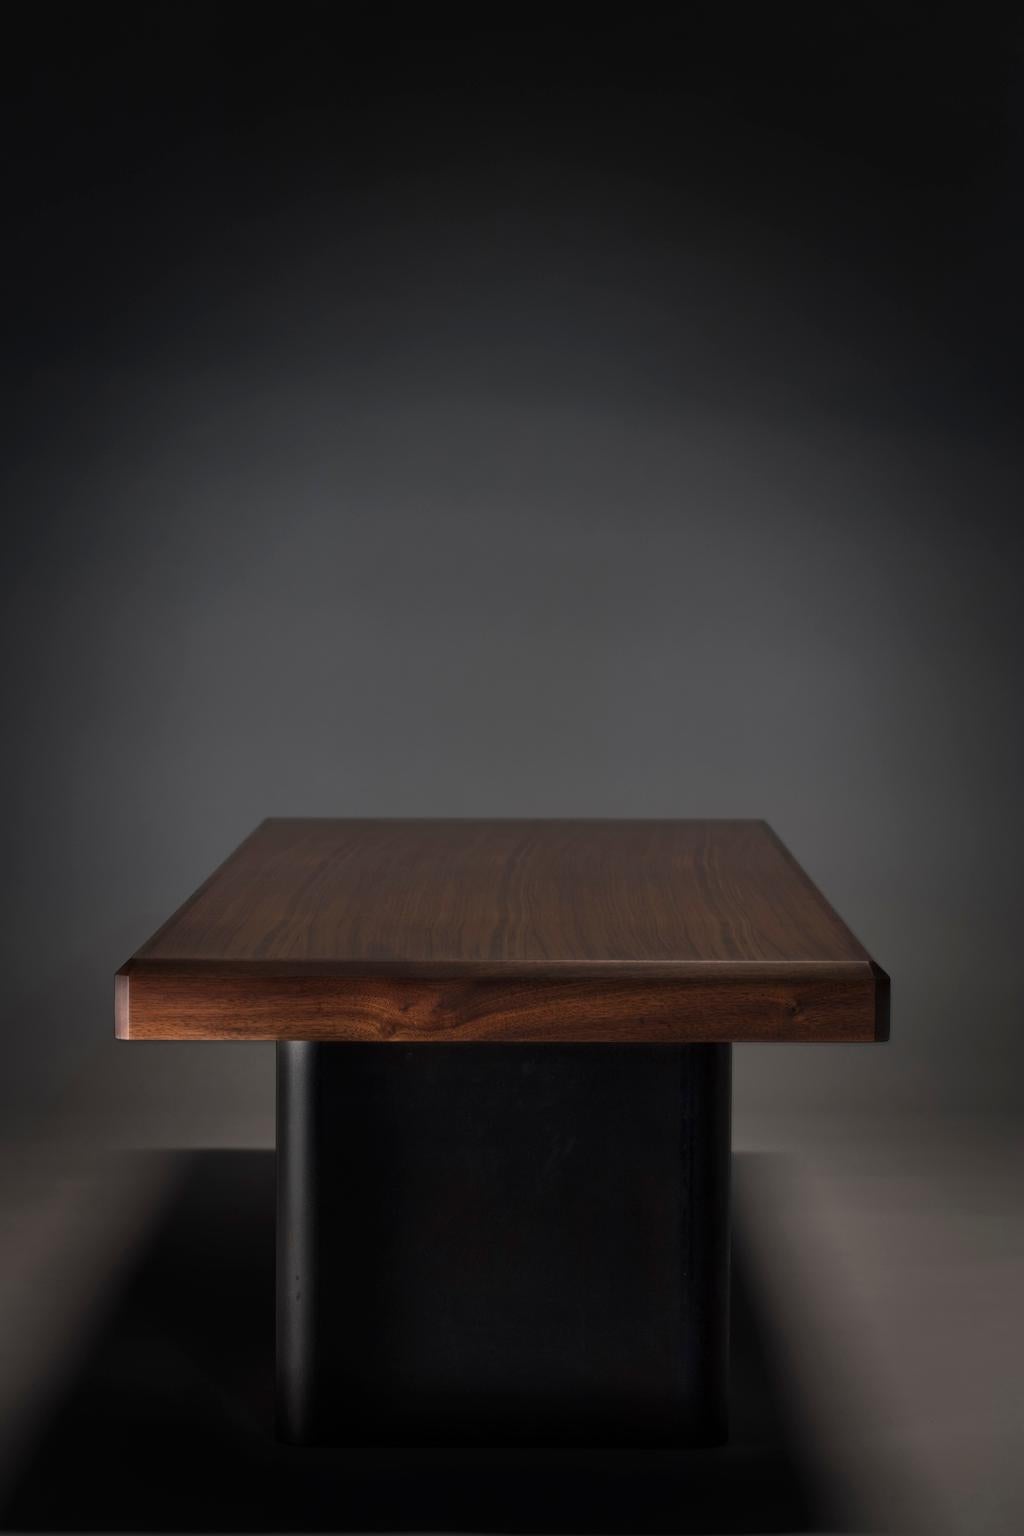 Collection I: Bridge table

A refined, chamfered walnut top rests upon a robust steel architectural foundation, creating a bridge like expression of structure and span.

Dimensions:
56” L x 19.5” W x 13” H

Made to order.
 